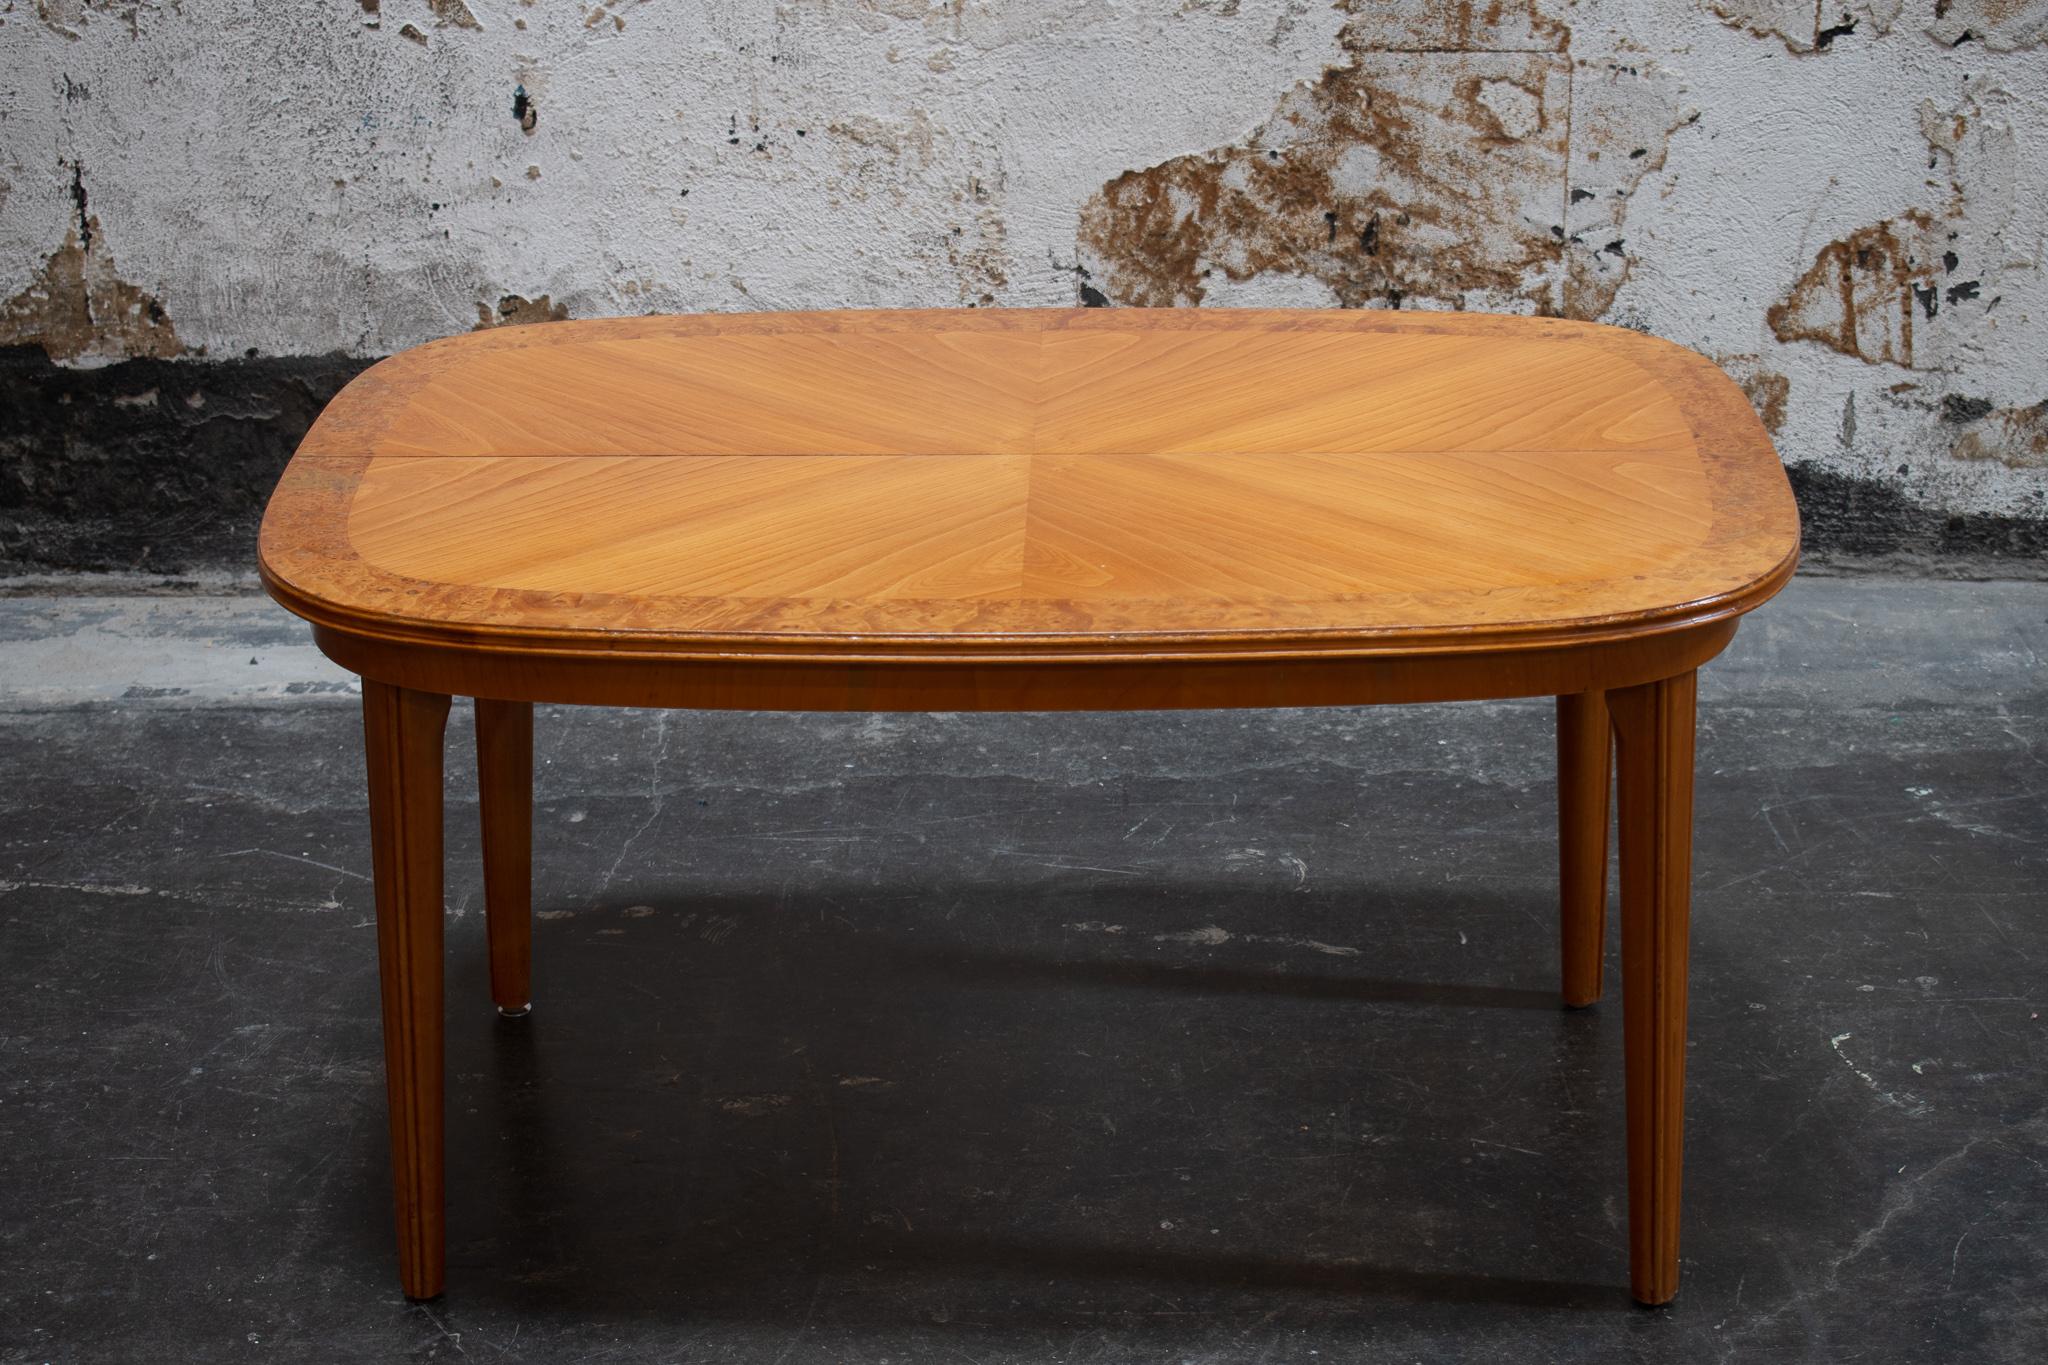 Gorgeous Art Deco coffee table made in Sweden. Features burl veneer border, reeded legs, and matchbooked Golden Elm veneer top. This table used to be adjustable, now the two sides are permanently affixed to each other, leaving a seam running